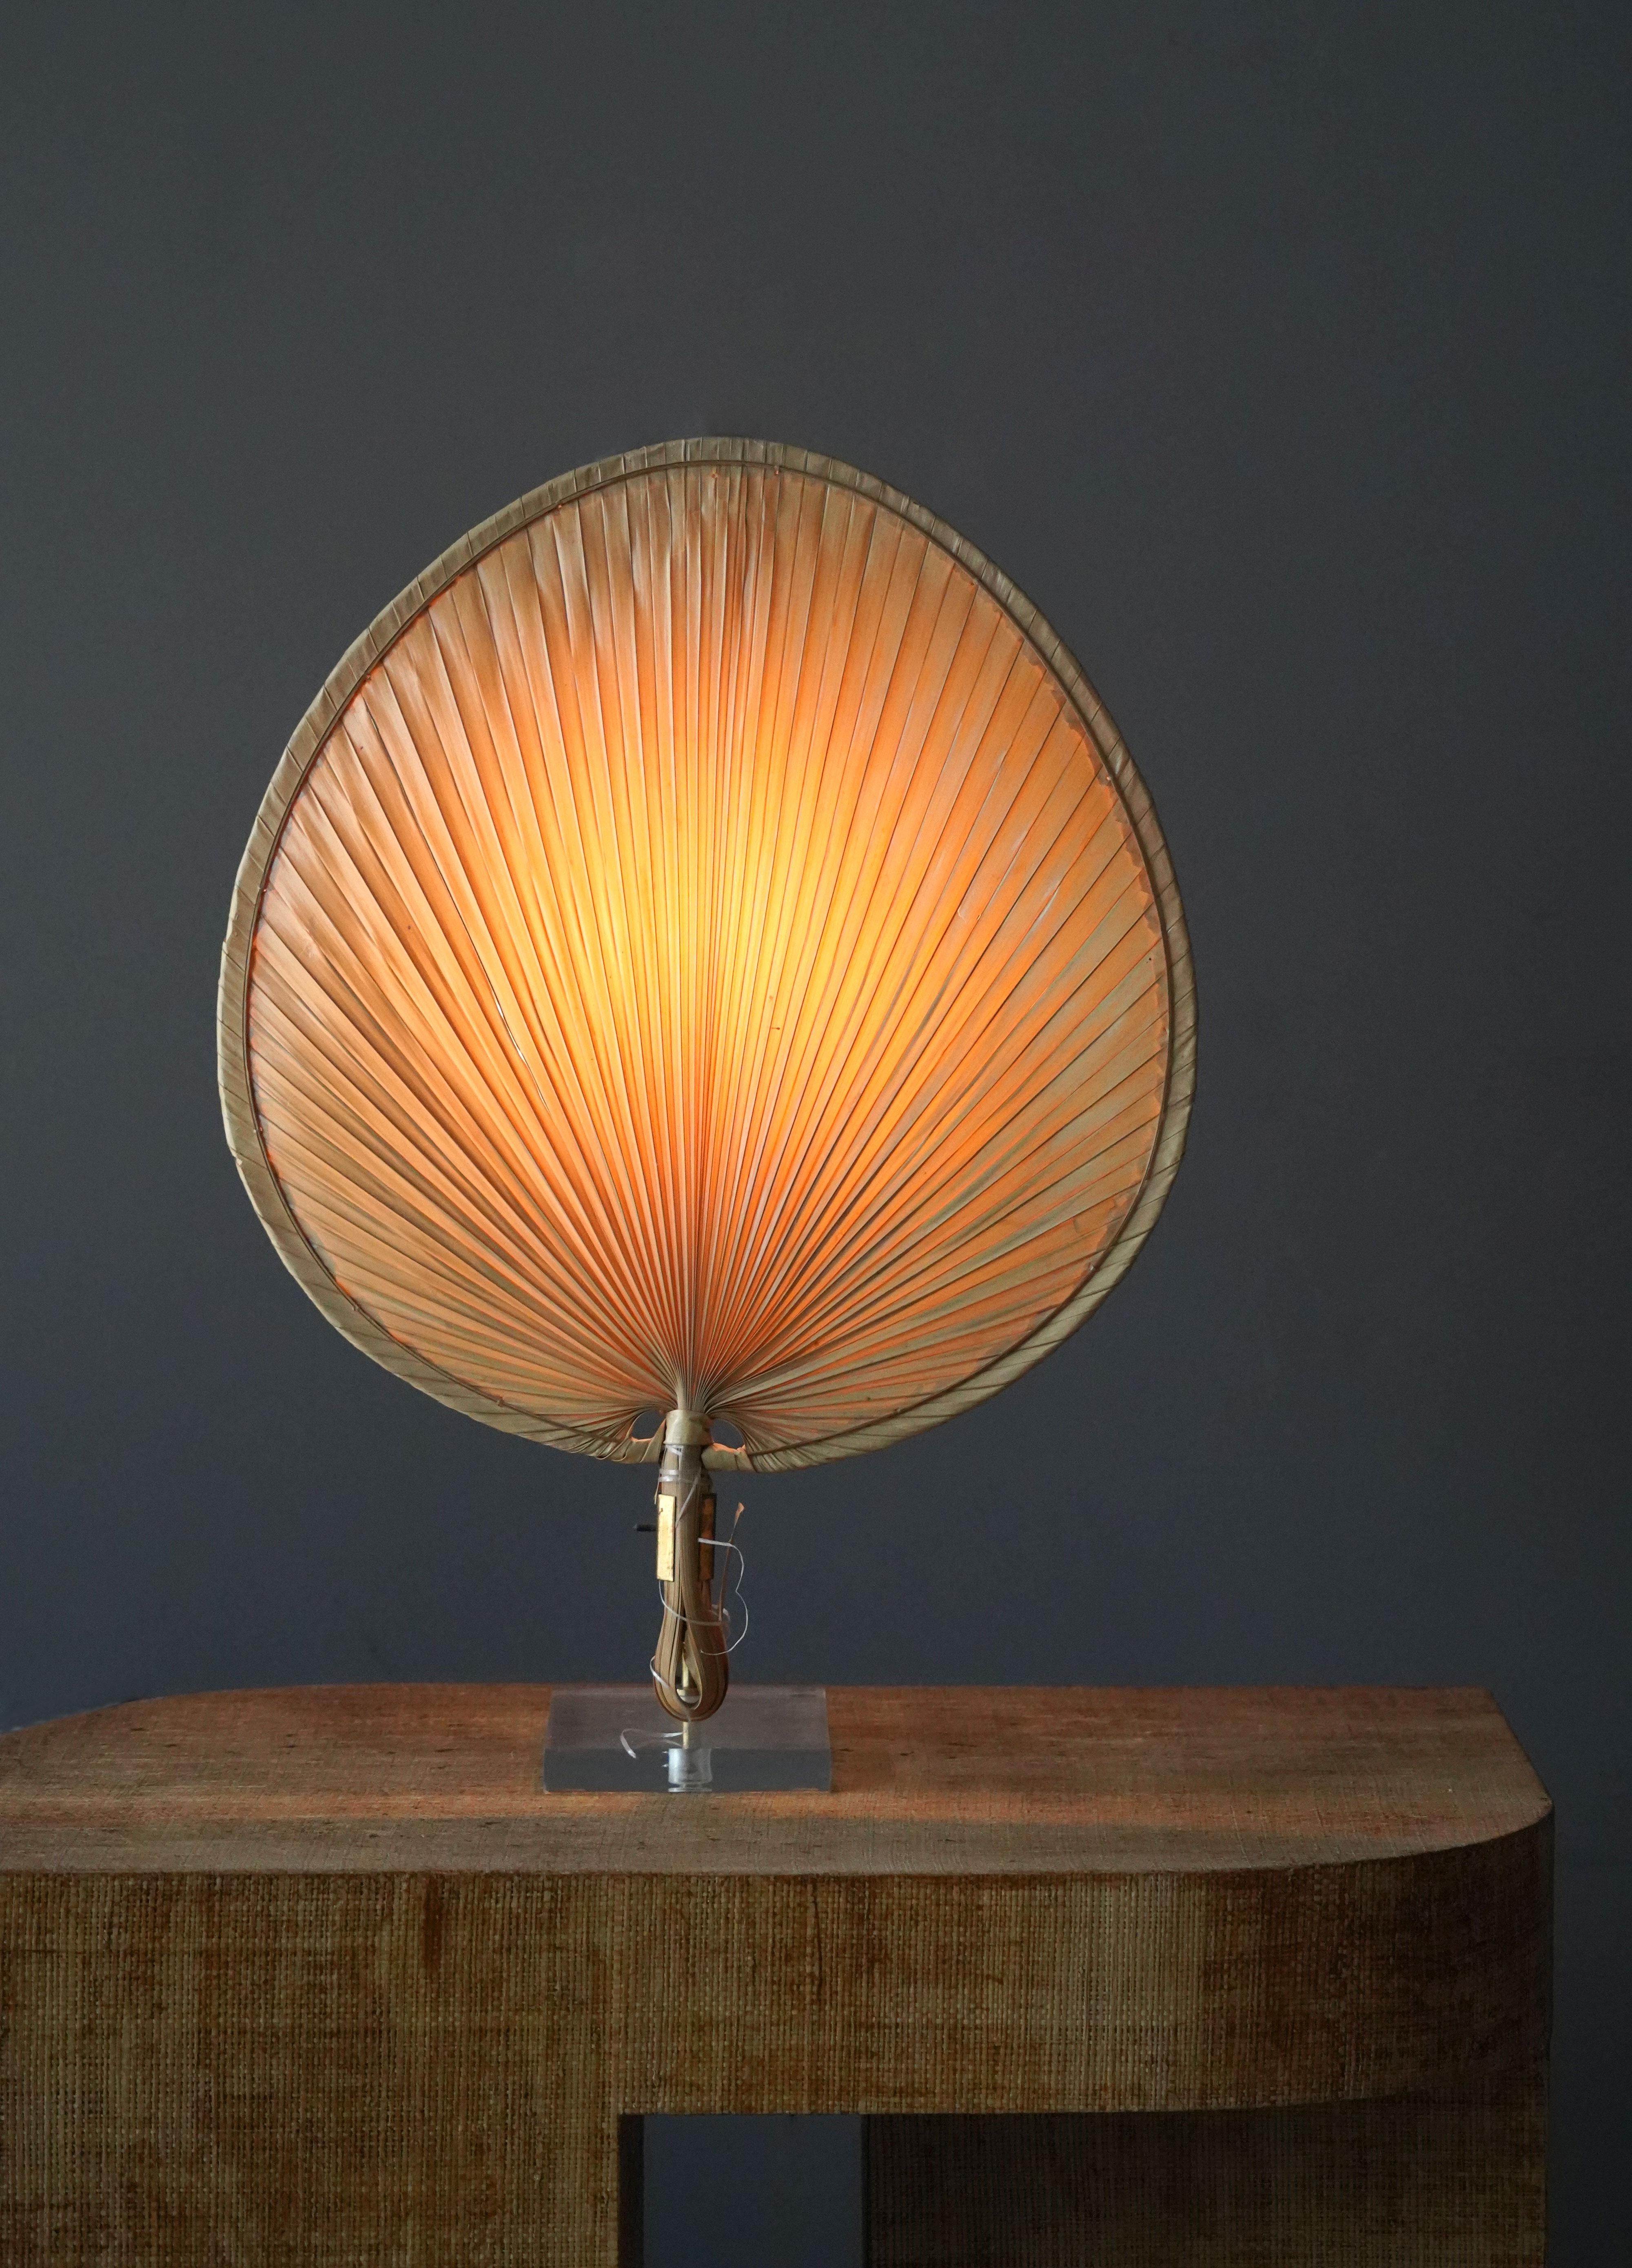 A table lamp in the shape of a Japanese fan, bearing resemblance to Ingo Maurers famous 